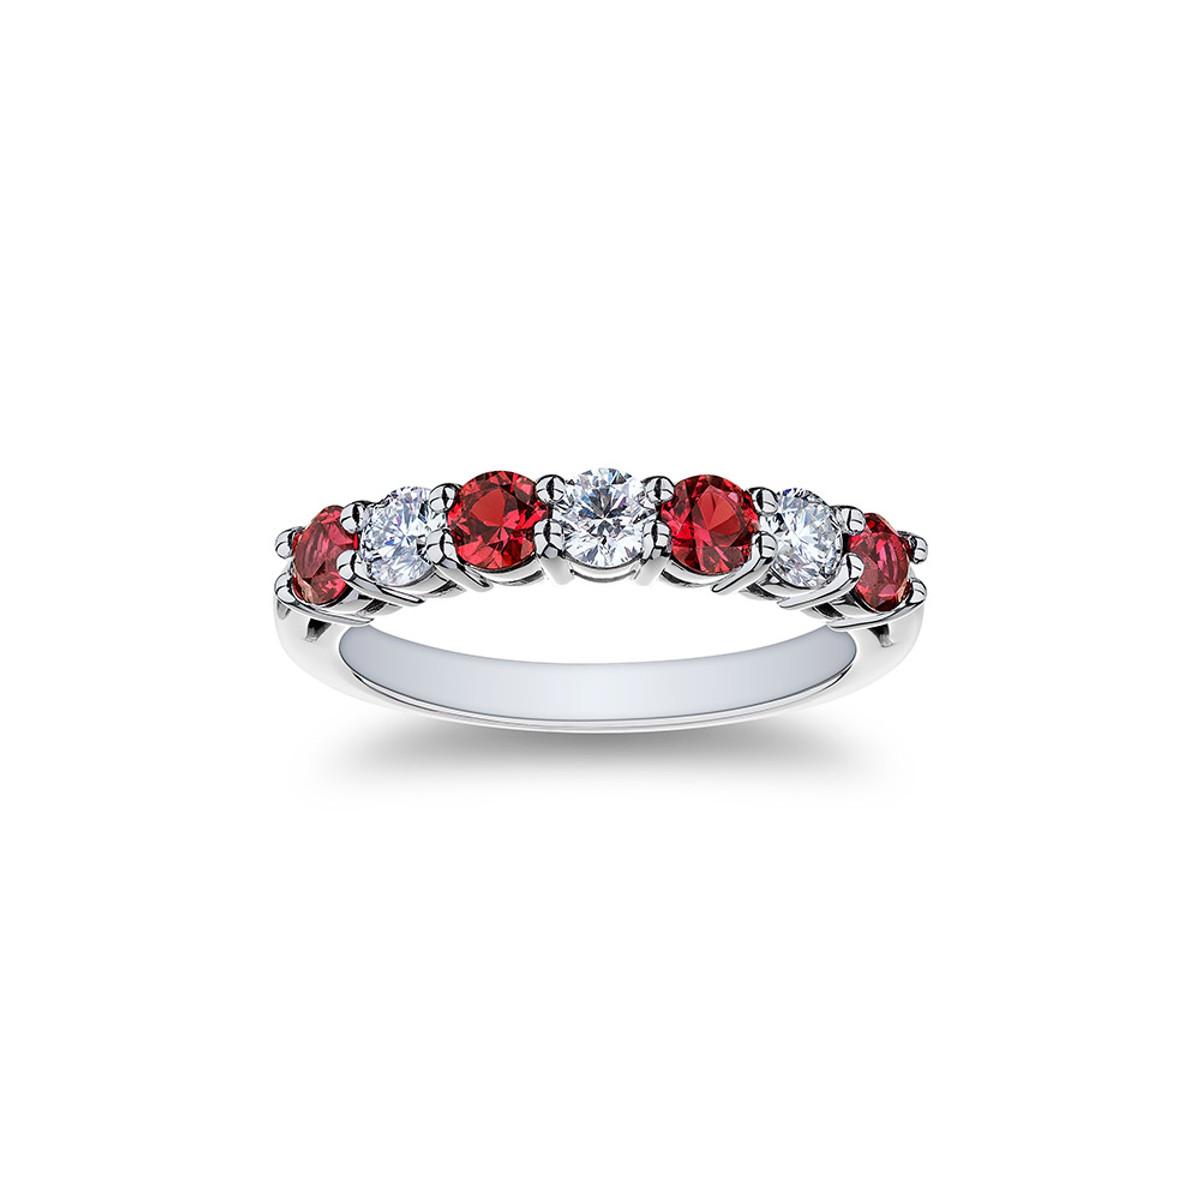 PLATINUM DIAMOND AND RUBY BAND D=0.45CTTW RUBY=0.72CTTW-43239 Product Image